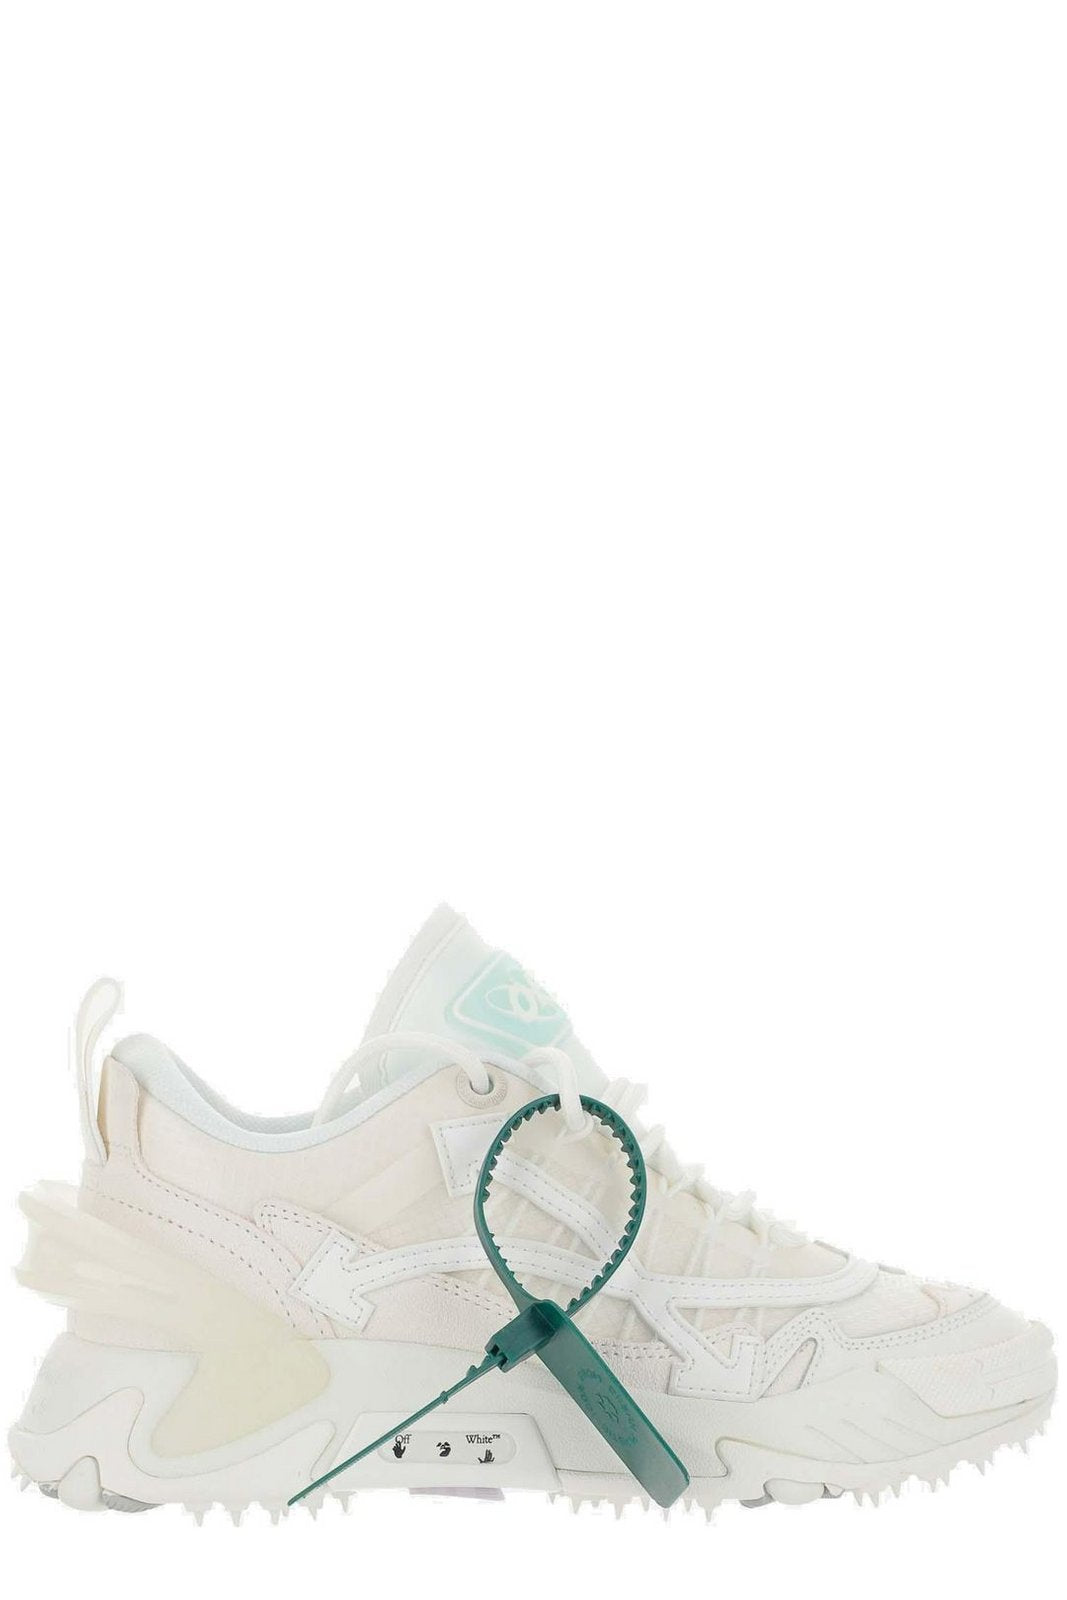 Off-White Odsy 2000 Lace-Up Sneakers